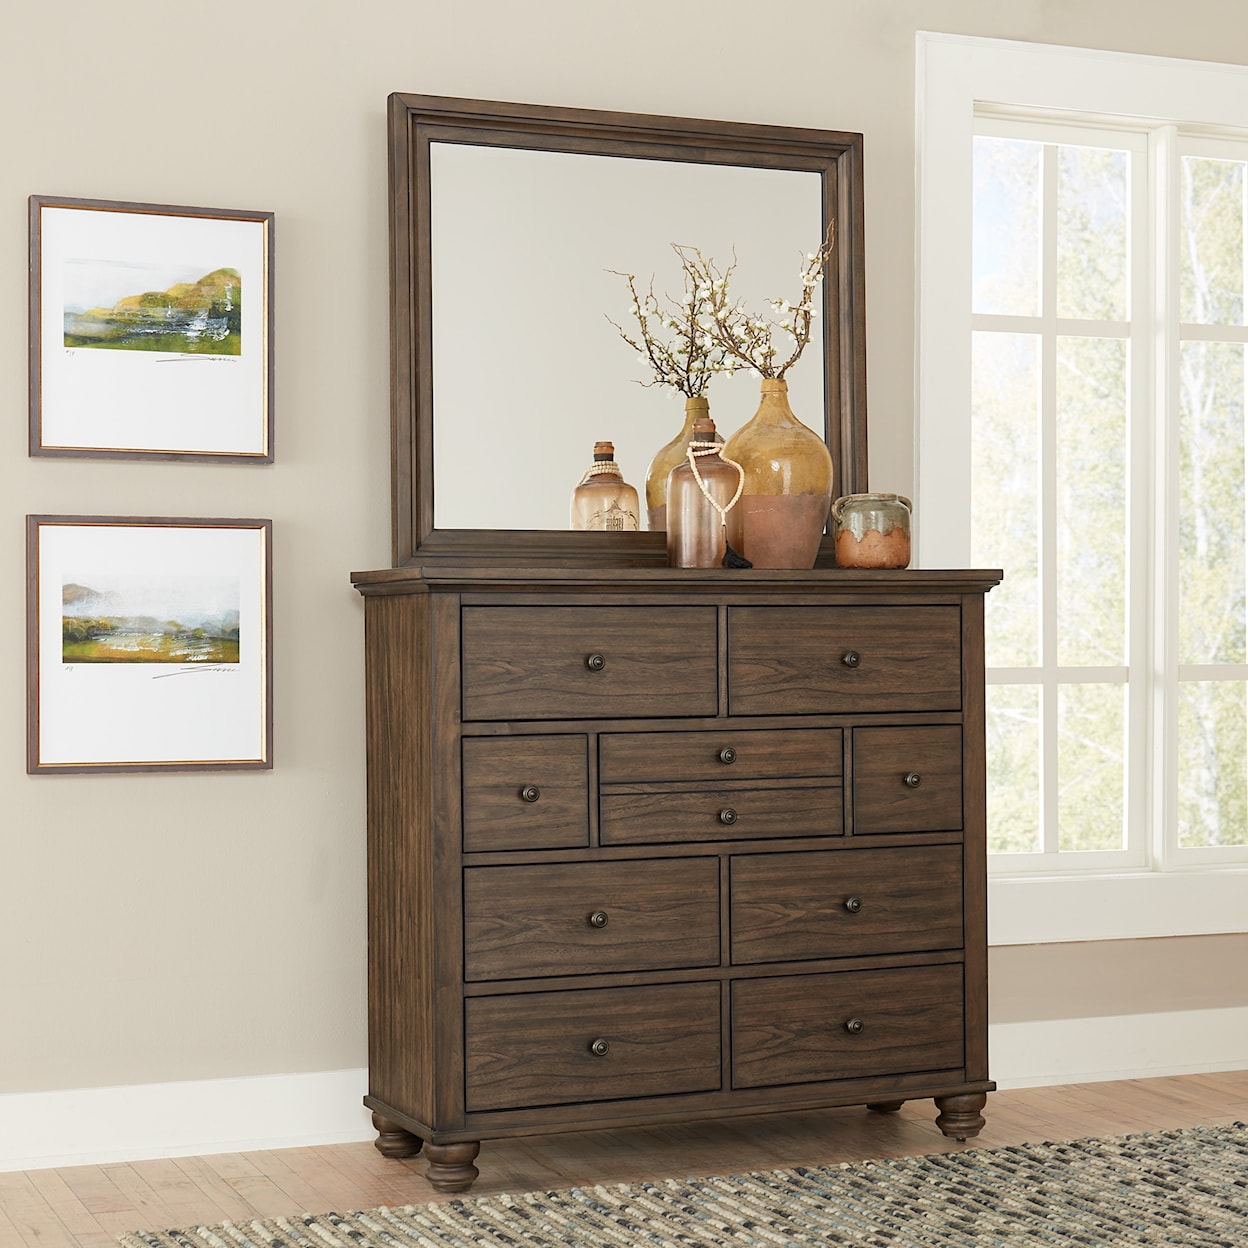 Aspenhome Hudson Valley Chest of Drawers and Mirror Combination